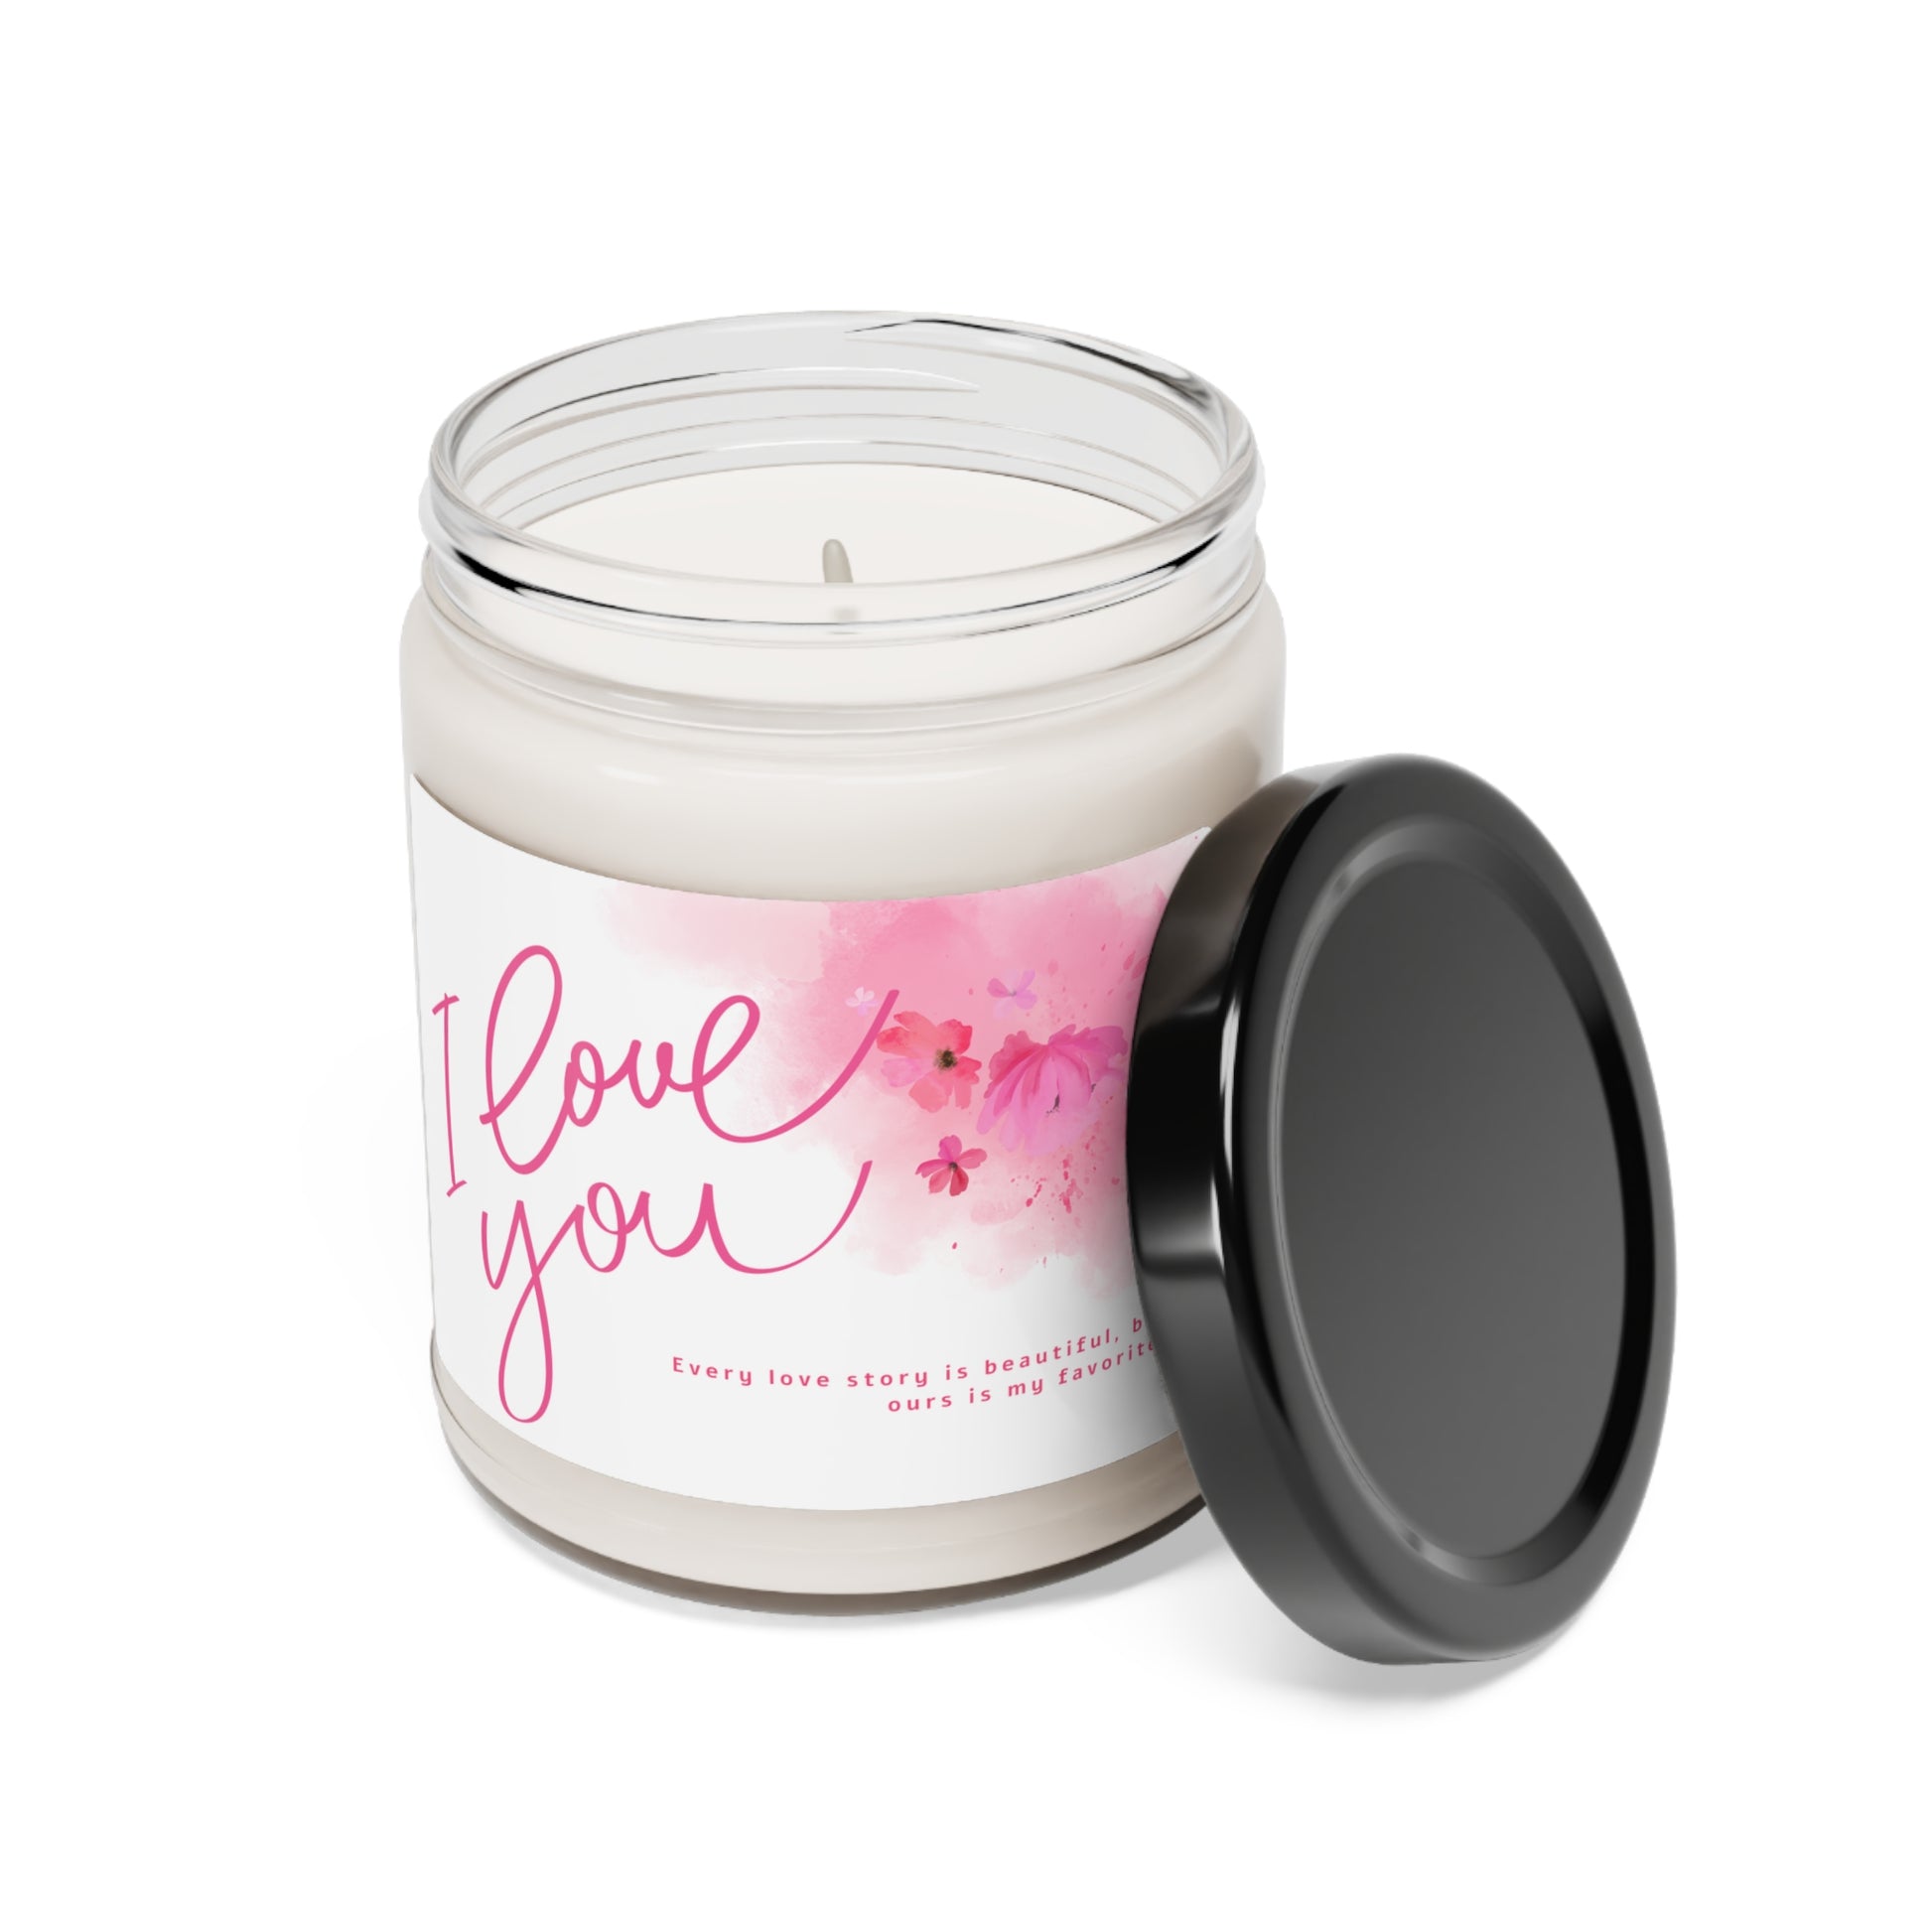 I love you - Scented Soy Candle, 9oz - Meditation Candle